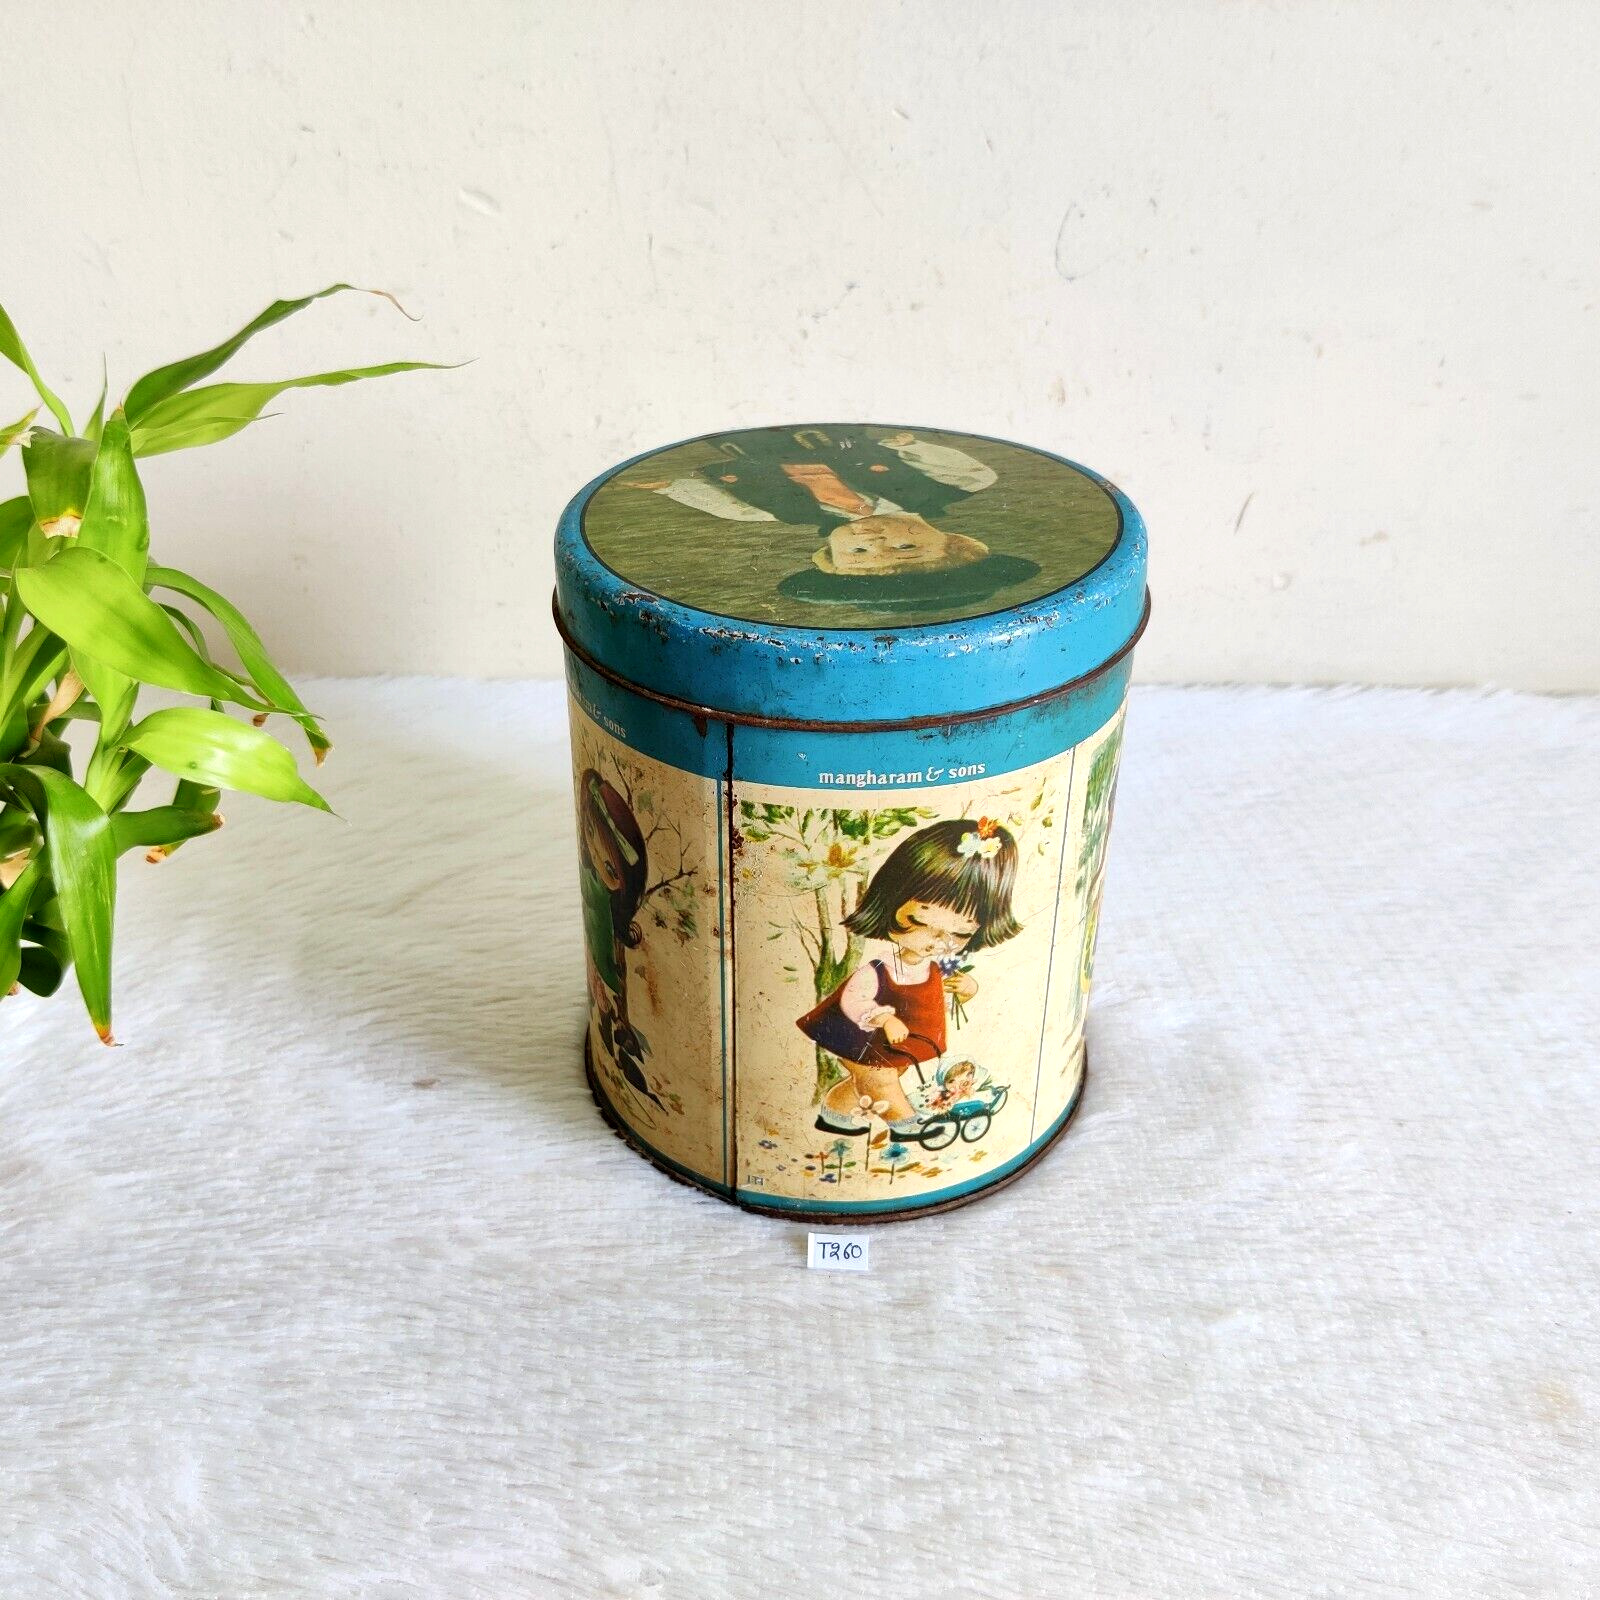 1950s Vintage English Kids Graphics  Mangharam & Sons Confectionery Tin Box T260